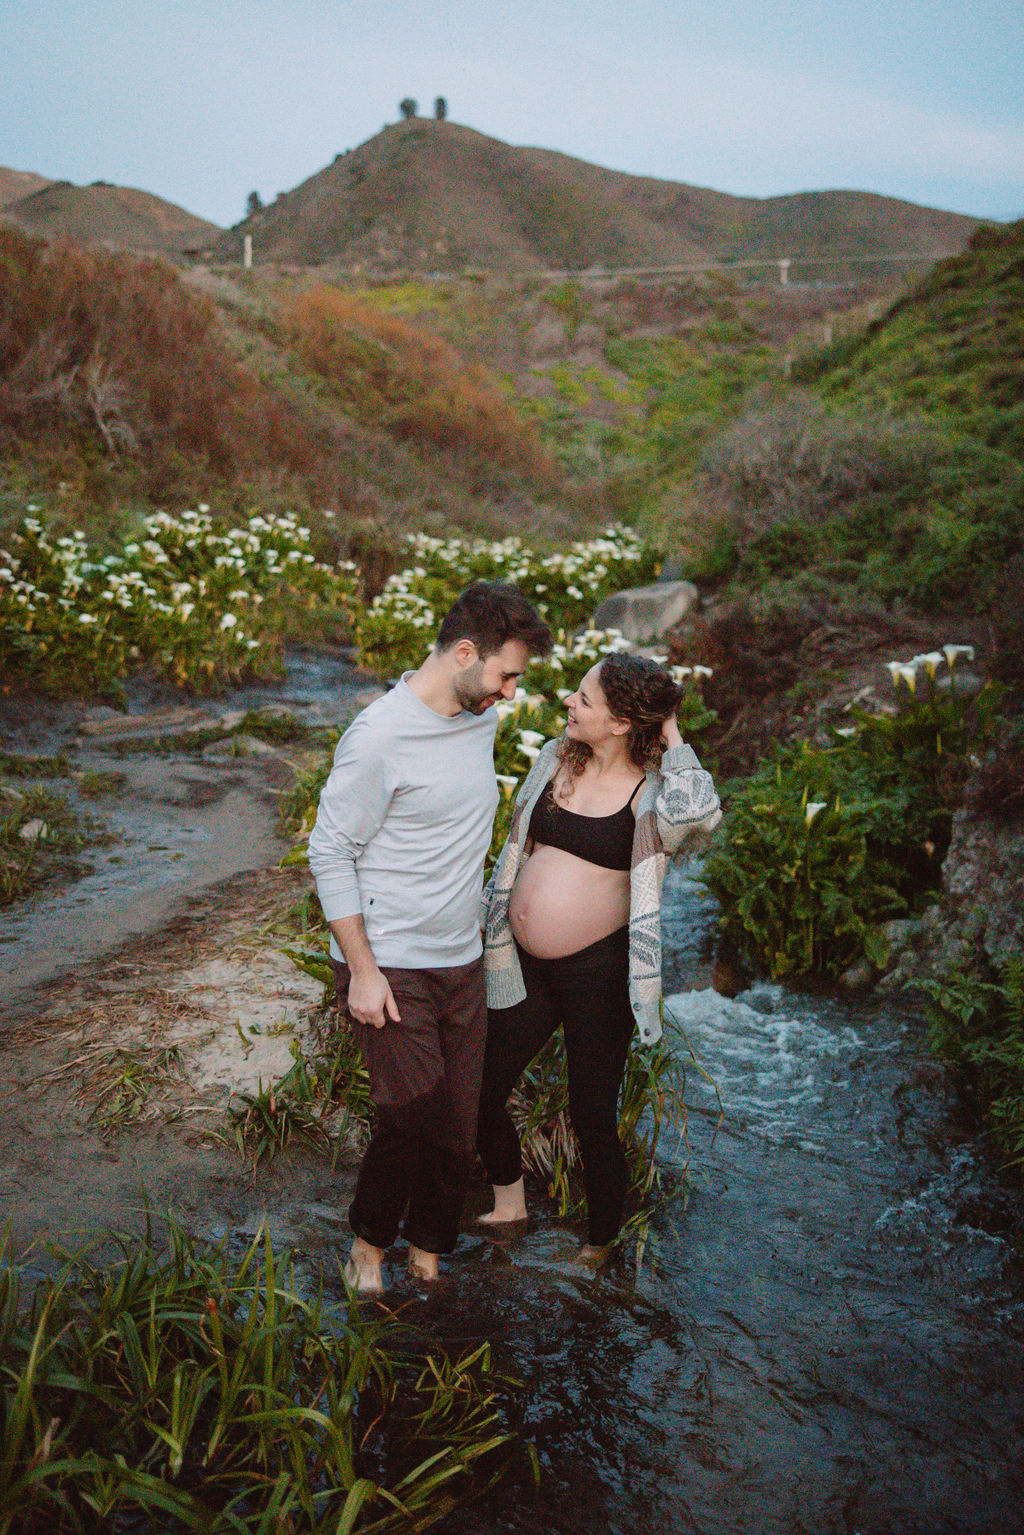 A couple expecting a baby, sharing a tender moment amidst a field of white flowers at Big Sur